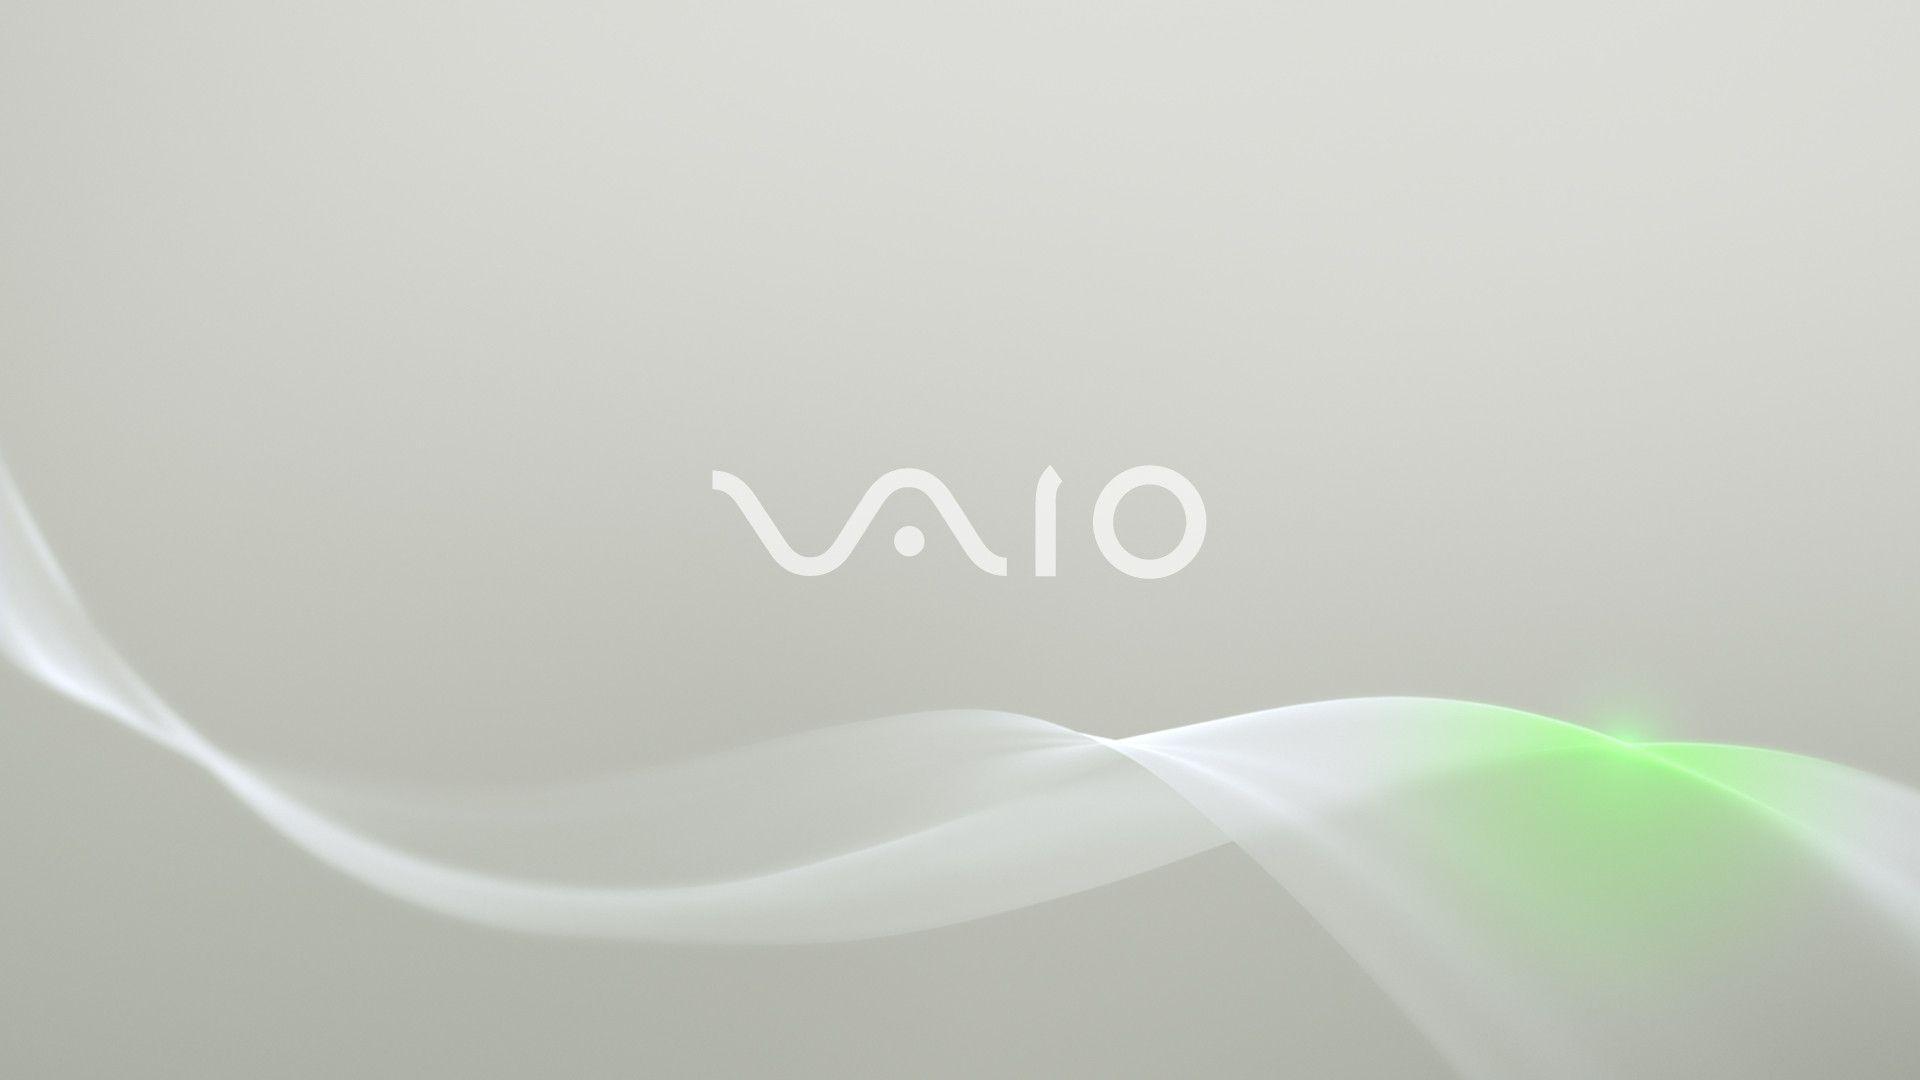 Pin Sony Vaio HD Dark Pack For Wallpaper With 1366x768 Resolution